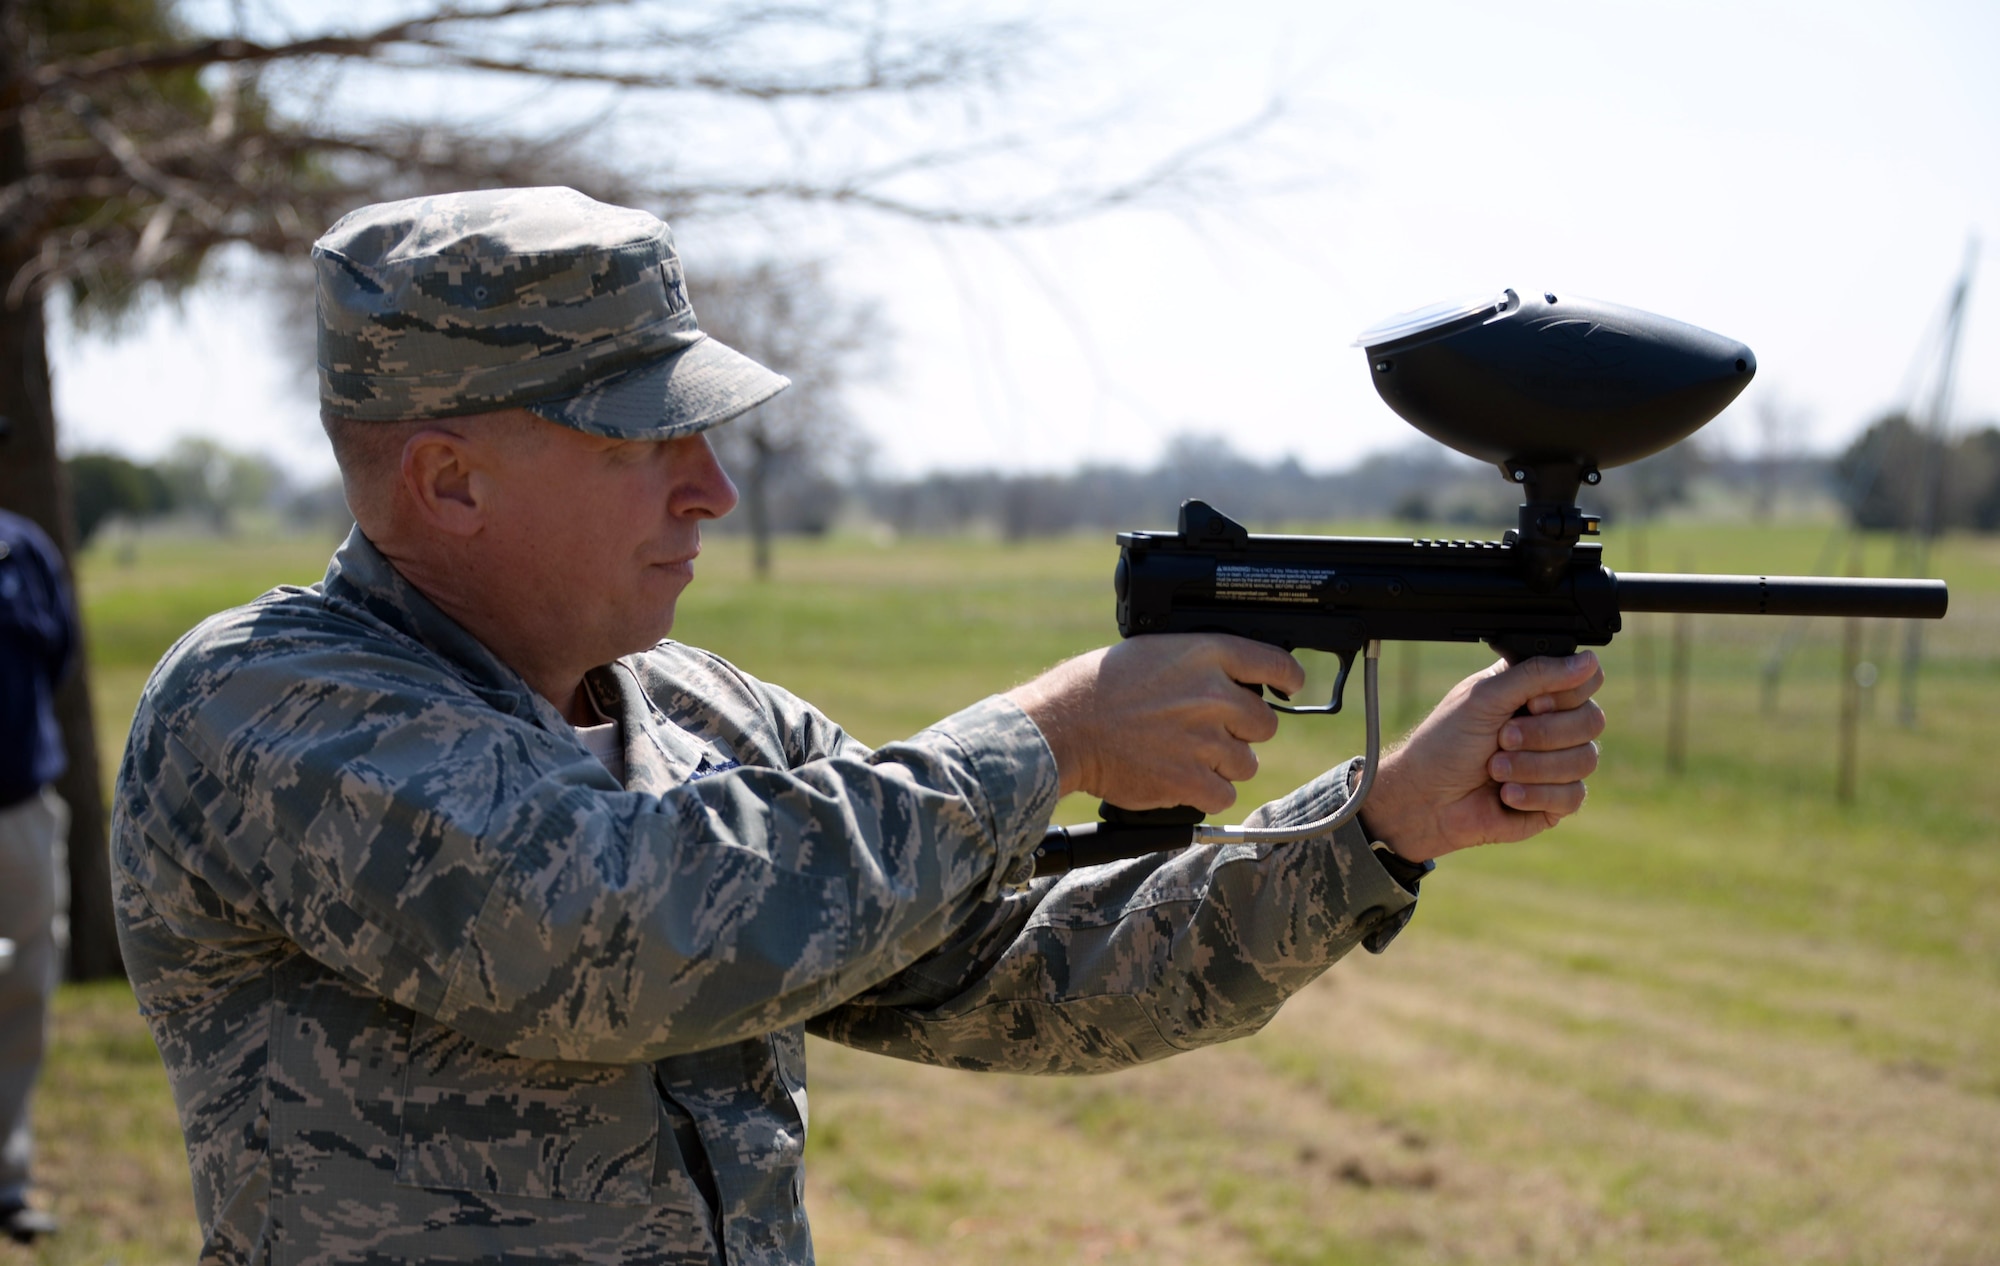 Brig. Gen. Patrick Doherty, 82nd Training Wing commander, test fires a paintball marker shortly after cutting the ribbon for the grand opening of the paintball facility at Sheppard Air Force Base, Texas, March 15, 2017. Along with the paintball facility, Wind Creek Park also offers a dog park, disc golf course and a jogging path. (U.S. Air Force photo by Senior Airman Robert L. McIlrath/Released)